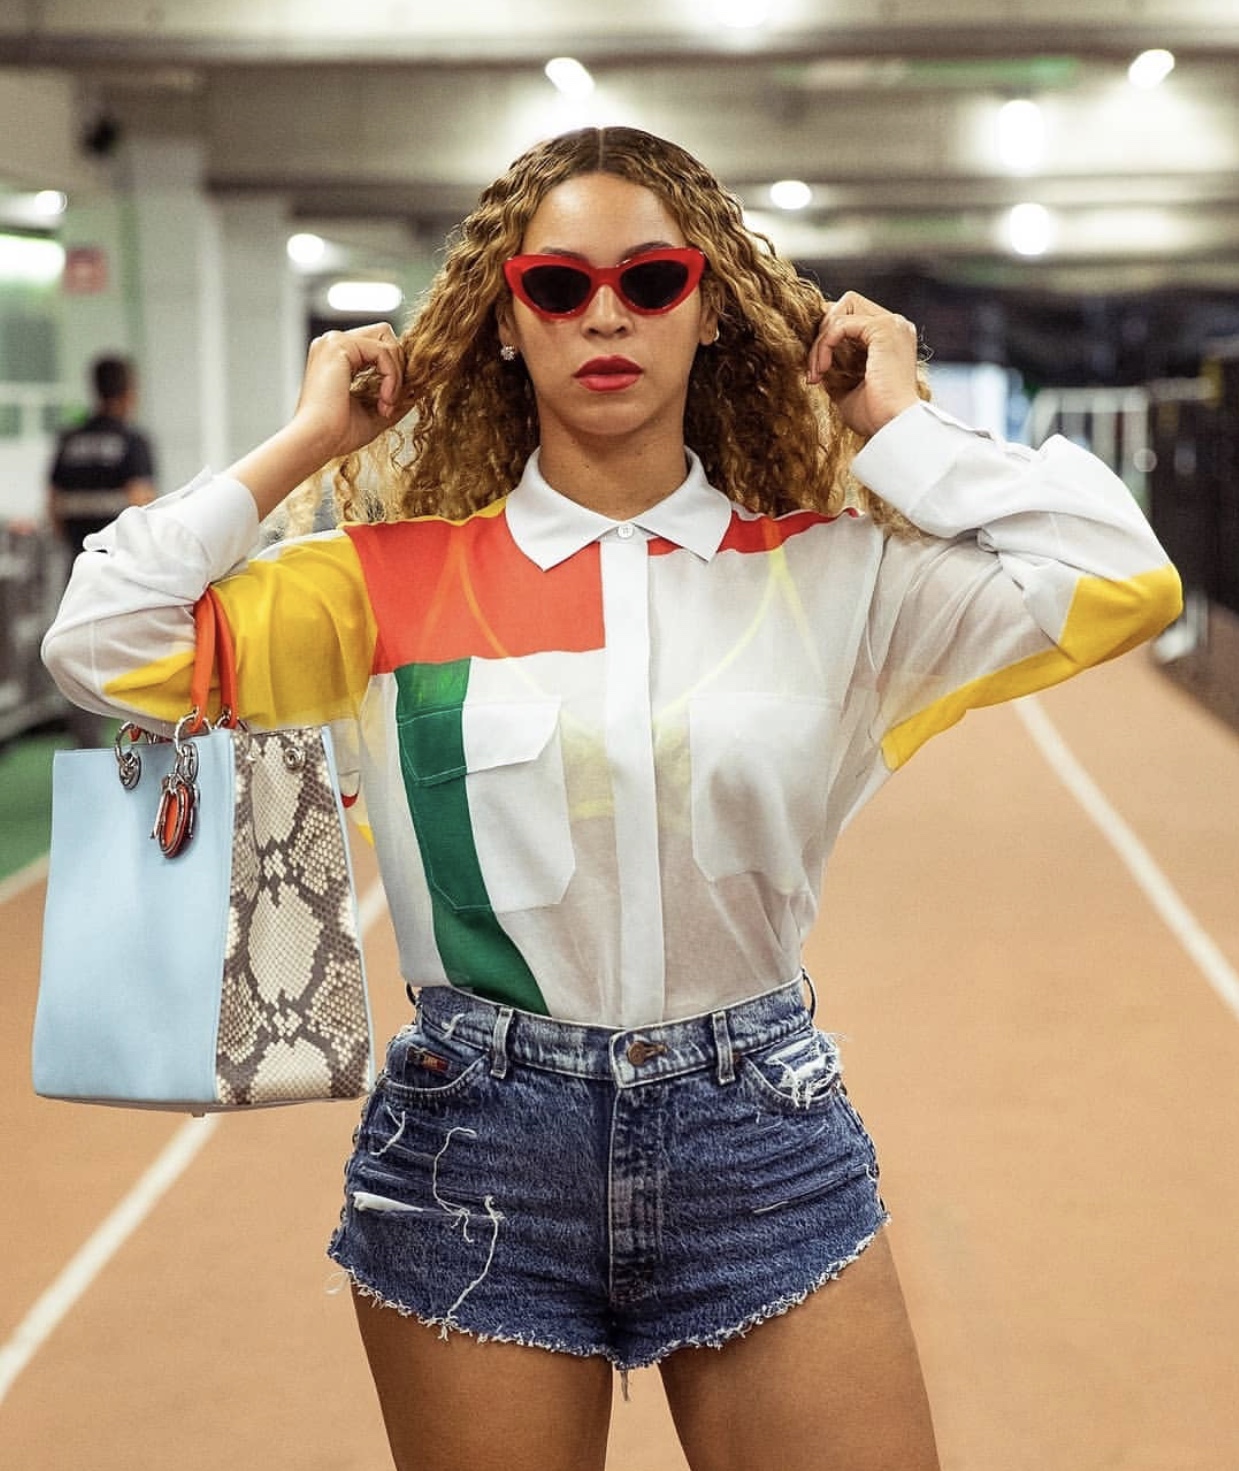 Beyonce Poses for the 'Gram in a Celine Spring 2018 Colorblock